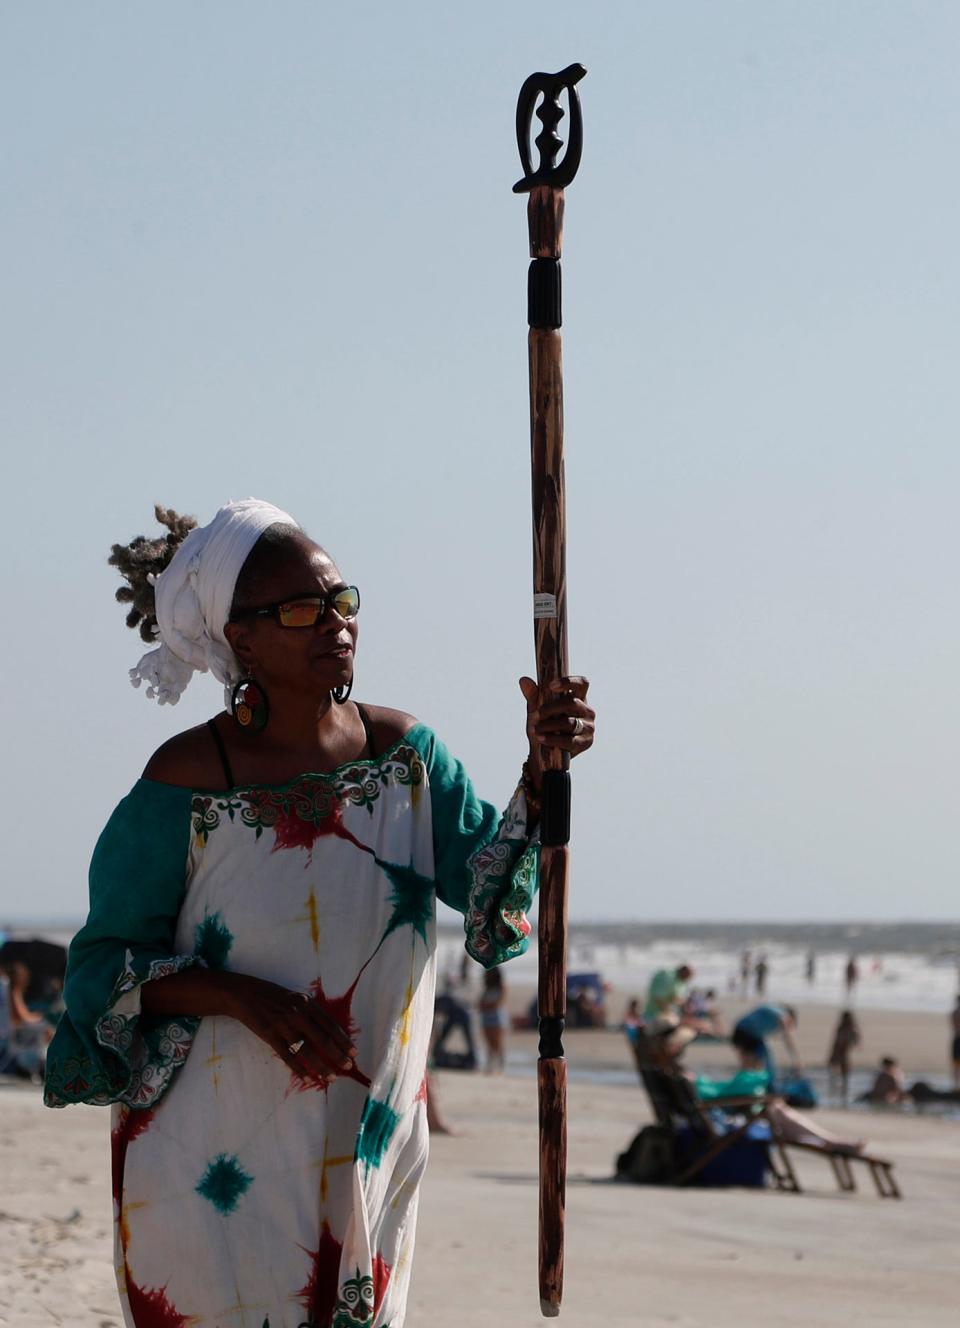 Julia Pearce Sunday June 19, 2022 during the Tybee Juneteenth Wade In.